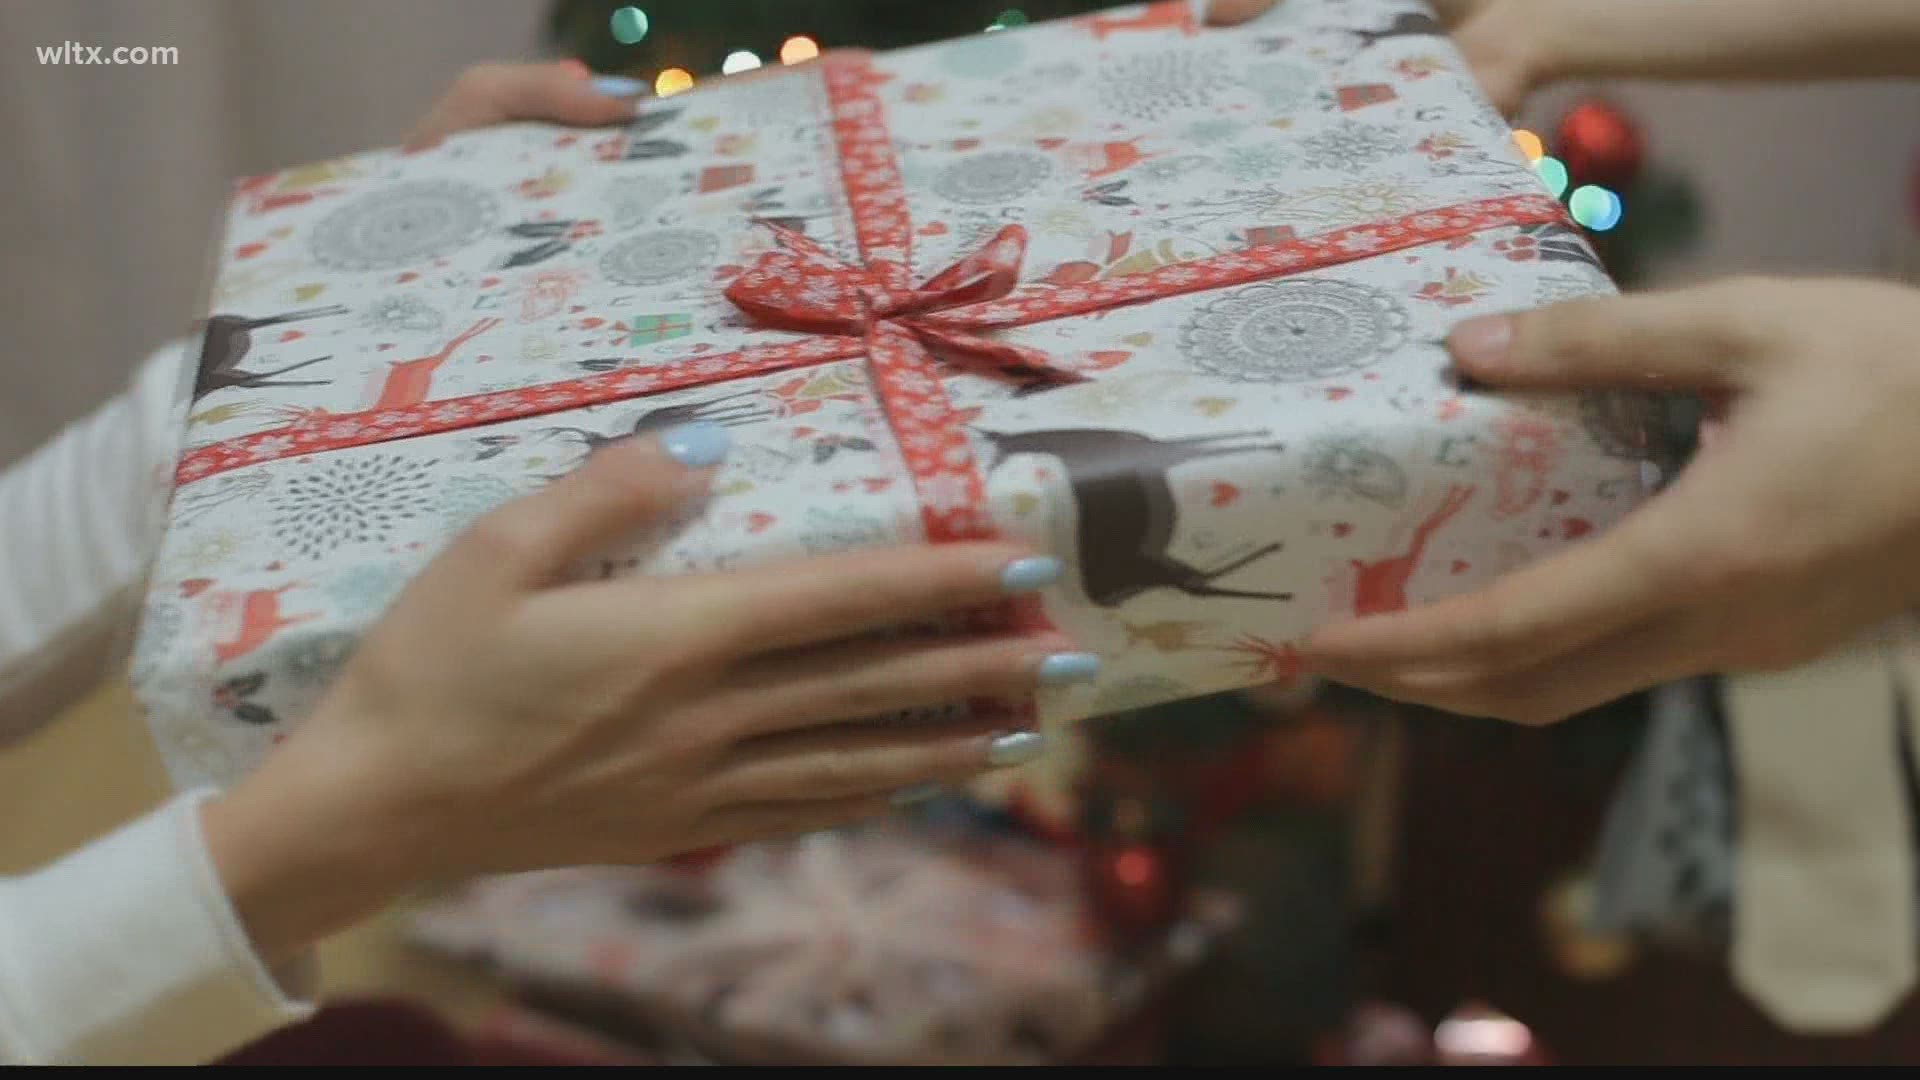 The non-profit consumer organization says while the gift exchange may seem appealing, it's considered a pyramid scheme, which is illegal in the U.S.